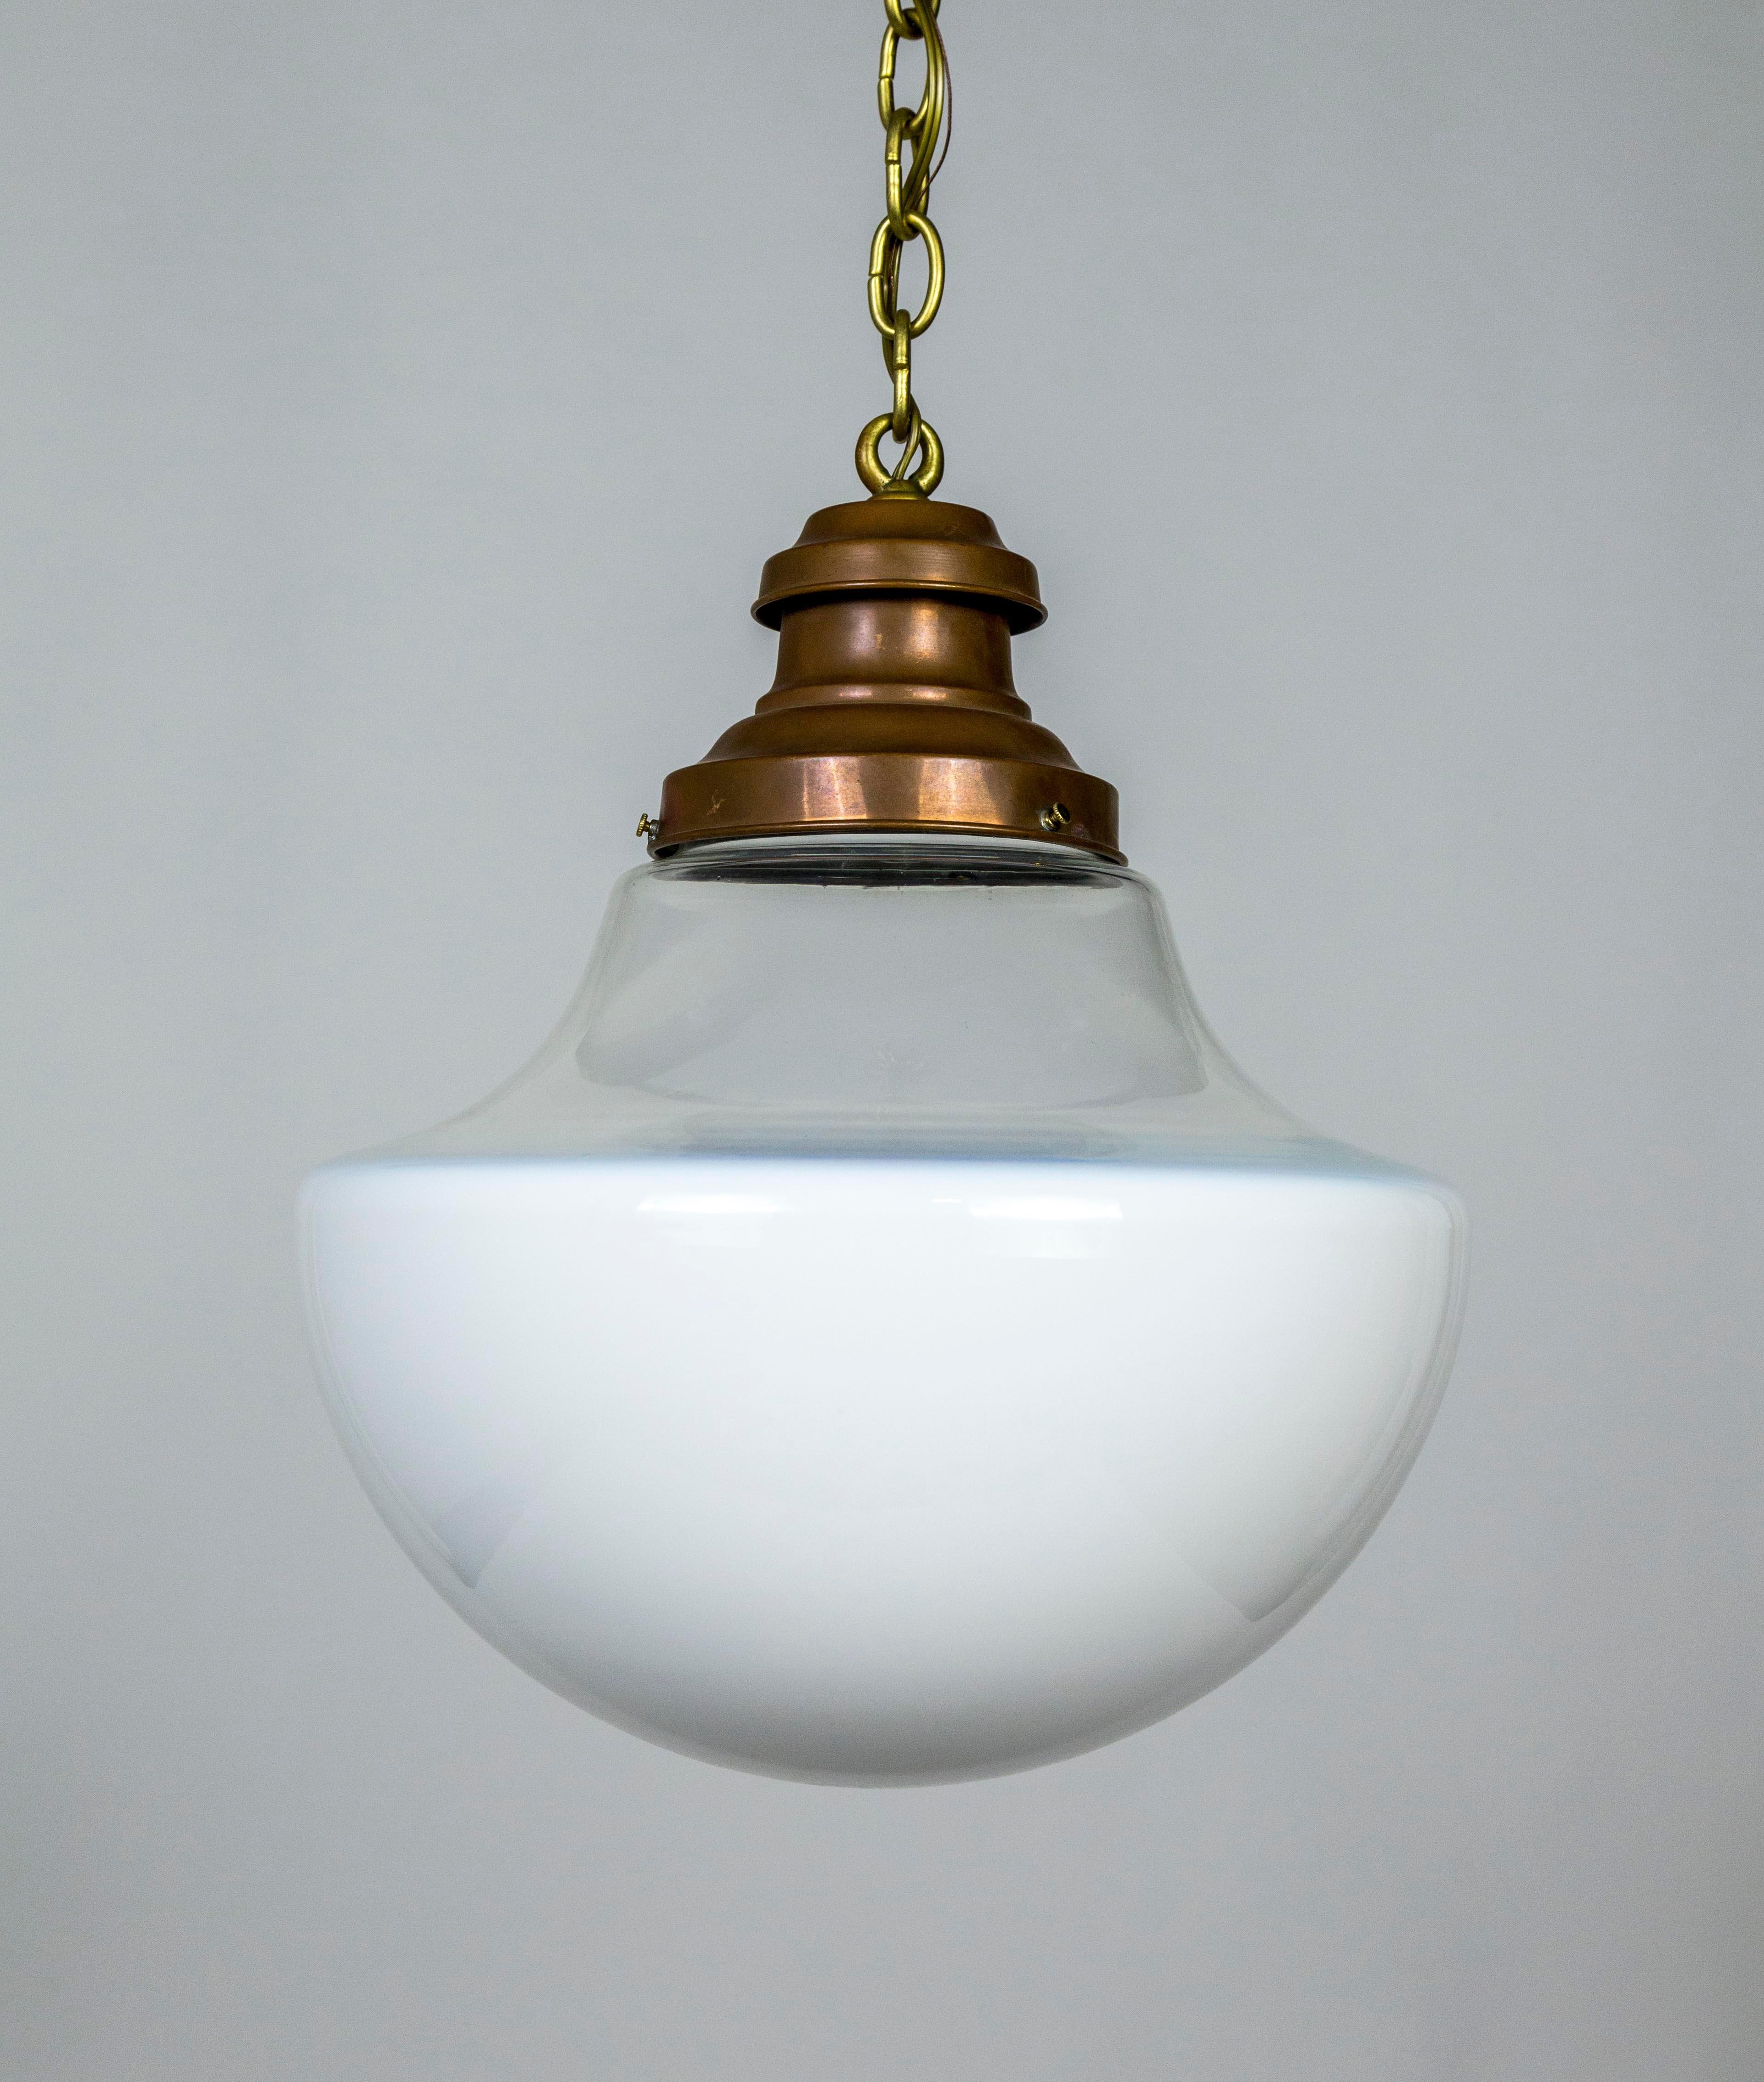 A pendant light with antique, two-toned, blown glass in a swooping shape; white on the bowl and clear on top. Held with a copper finished shade holder, and a long, gold chain. Newly wired. 58